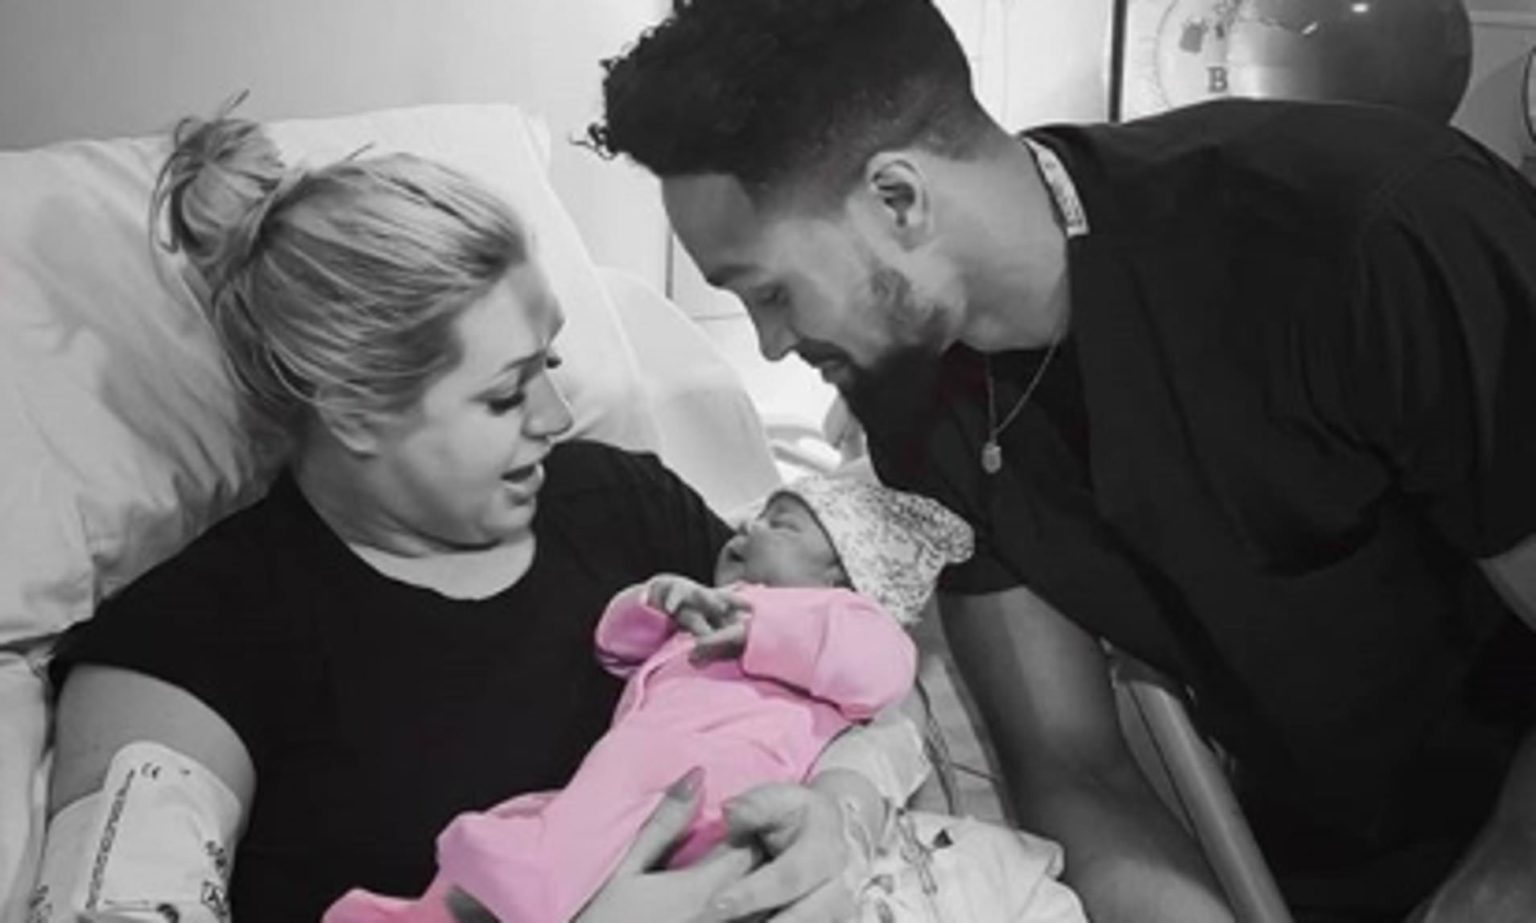 Ashley Banjo Wife - Talent Manager and New Mum